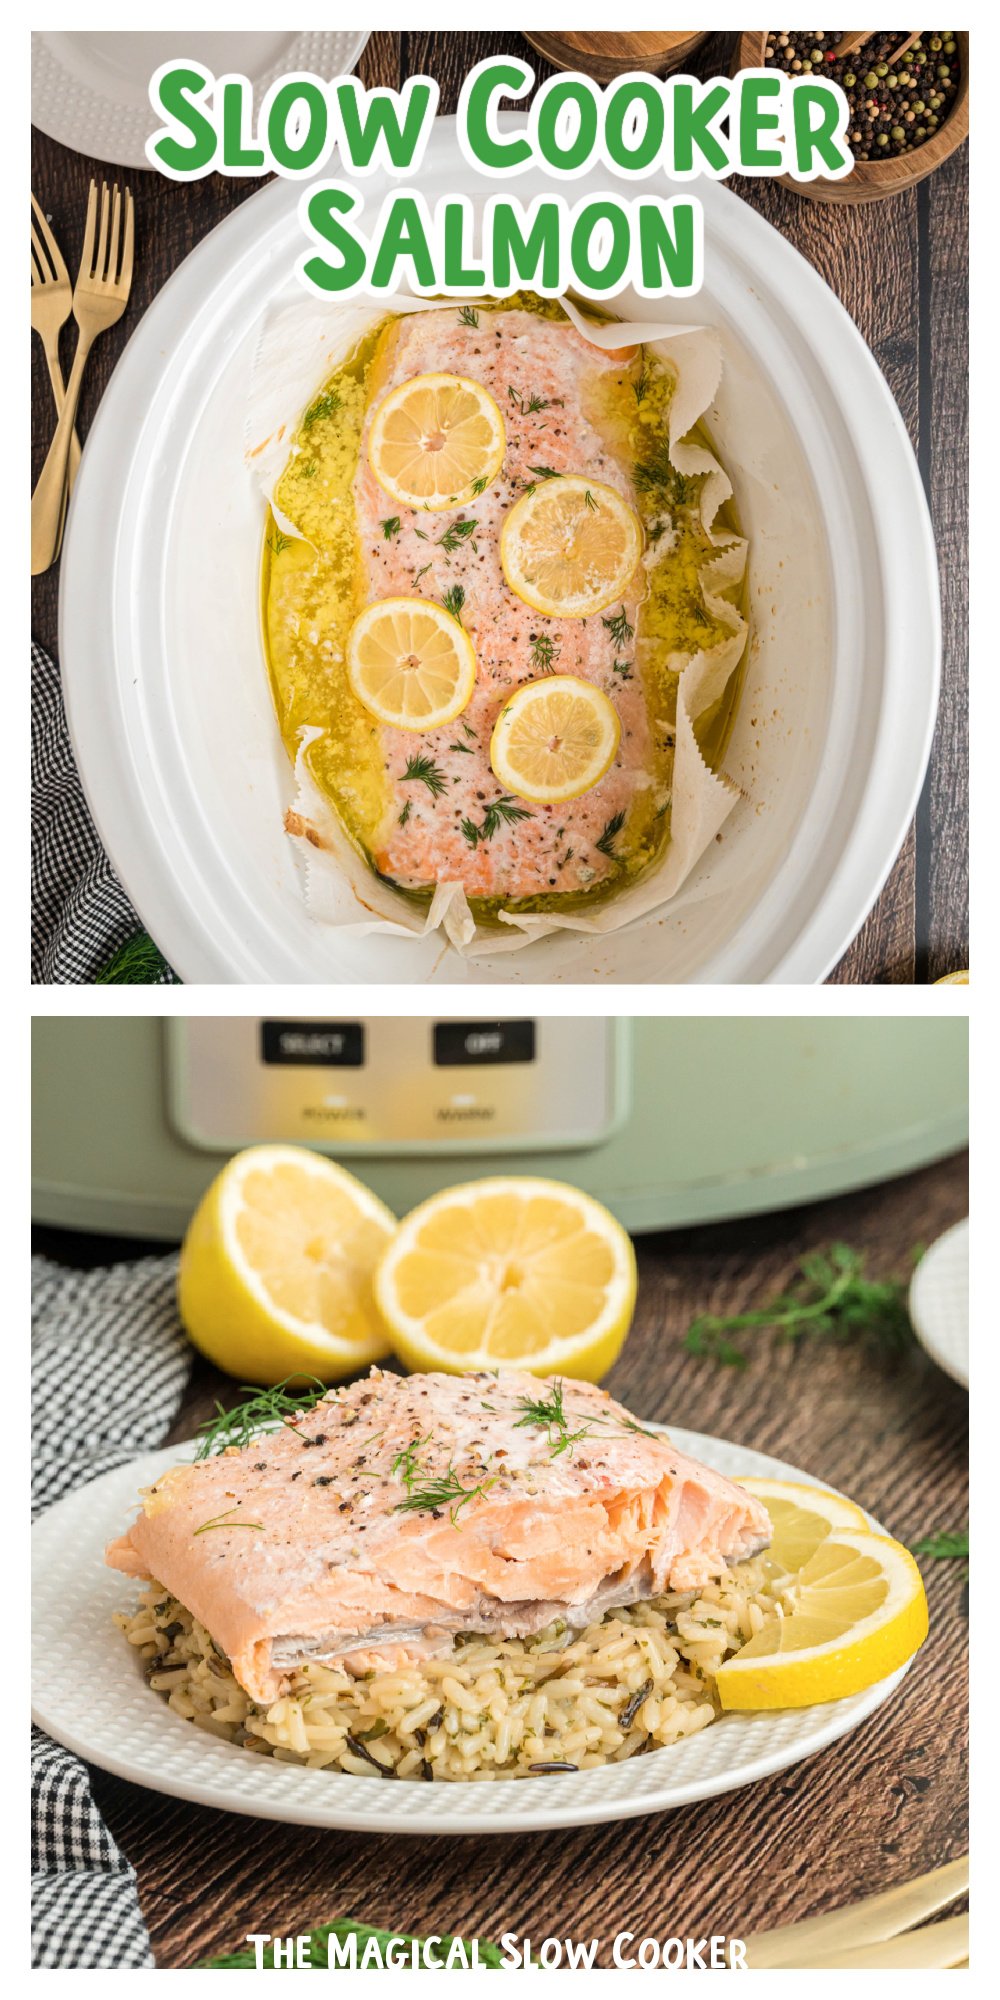 Slow Cooker Salmon - The Magical Slow Cooker